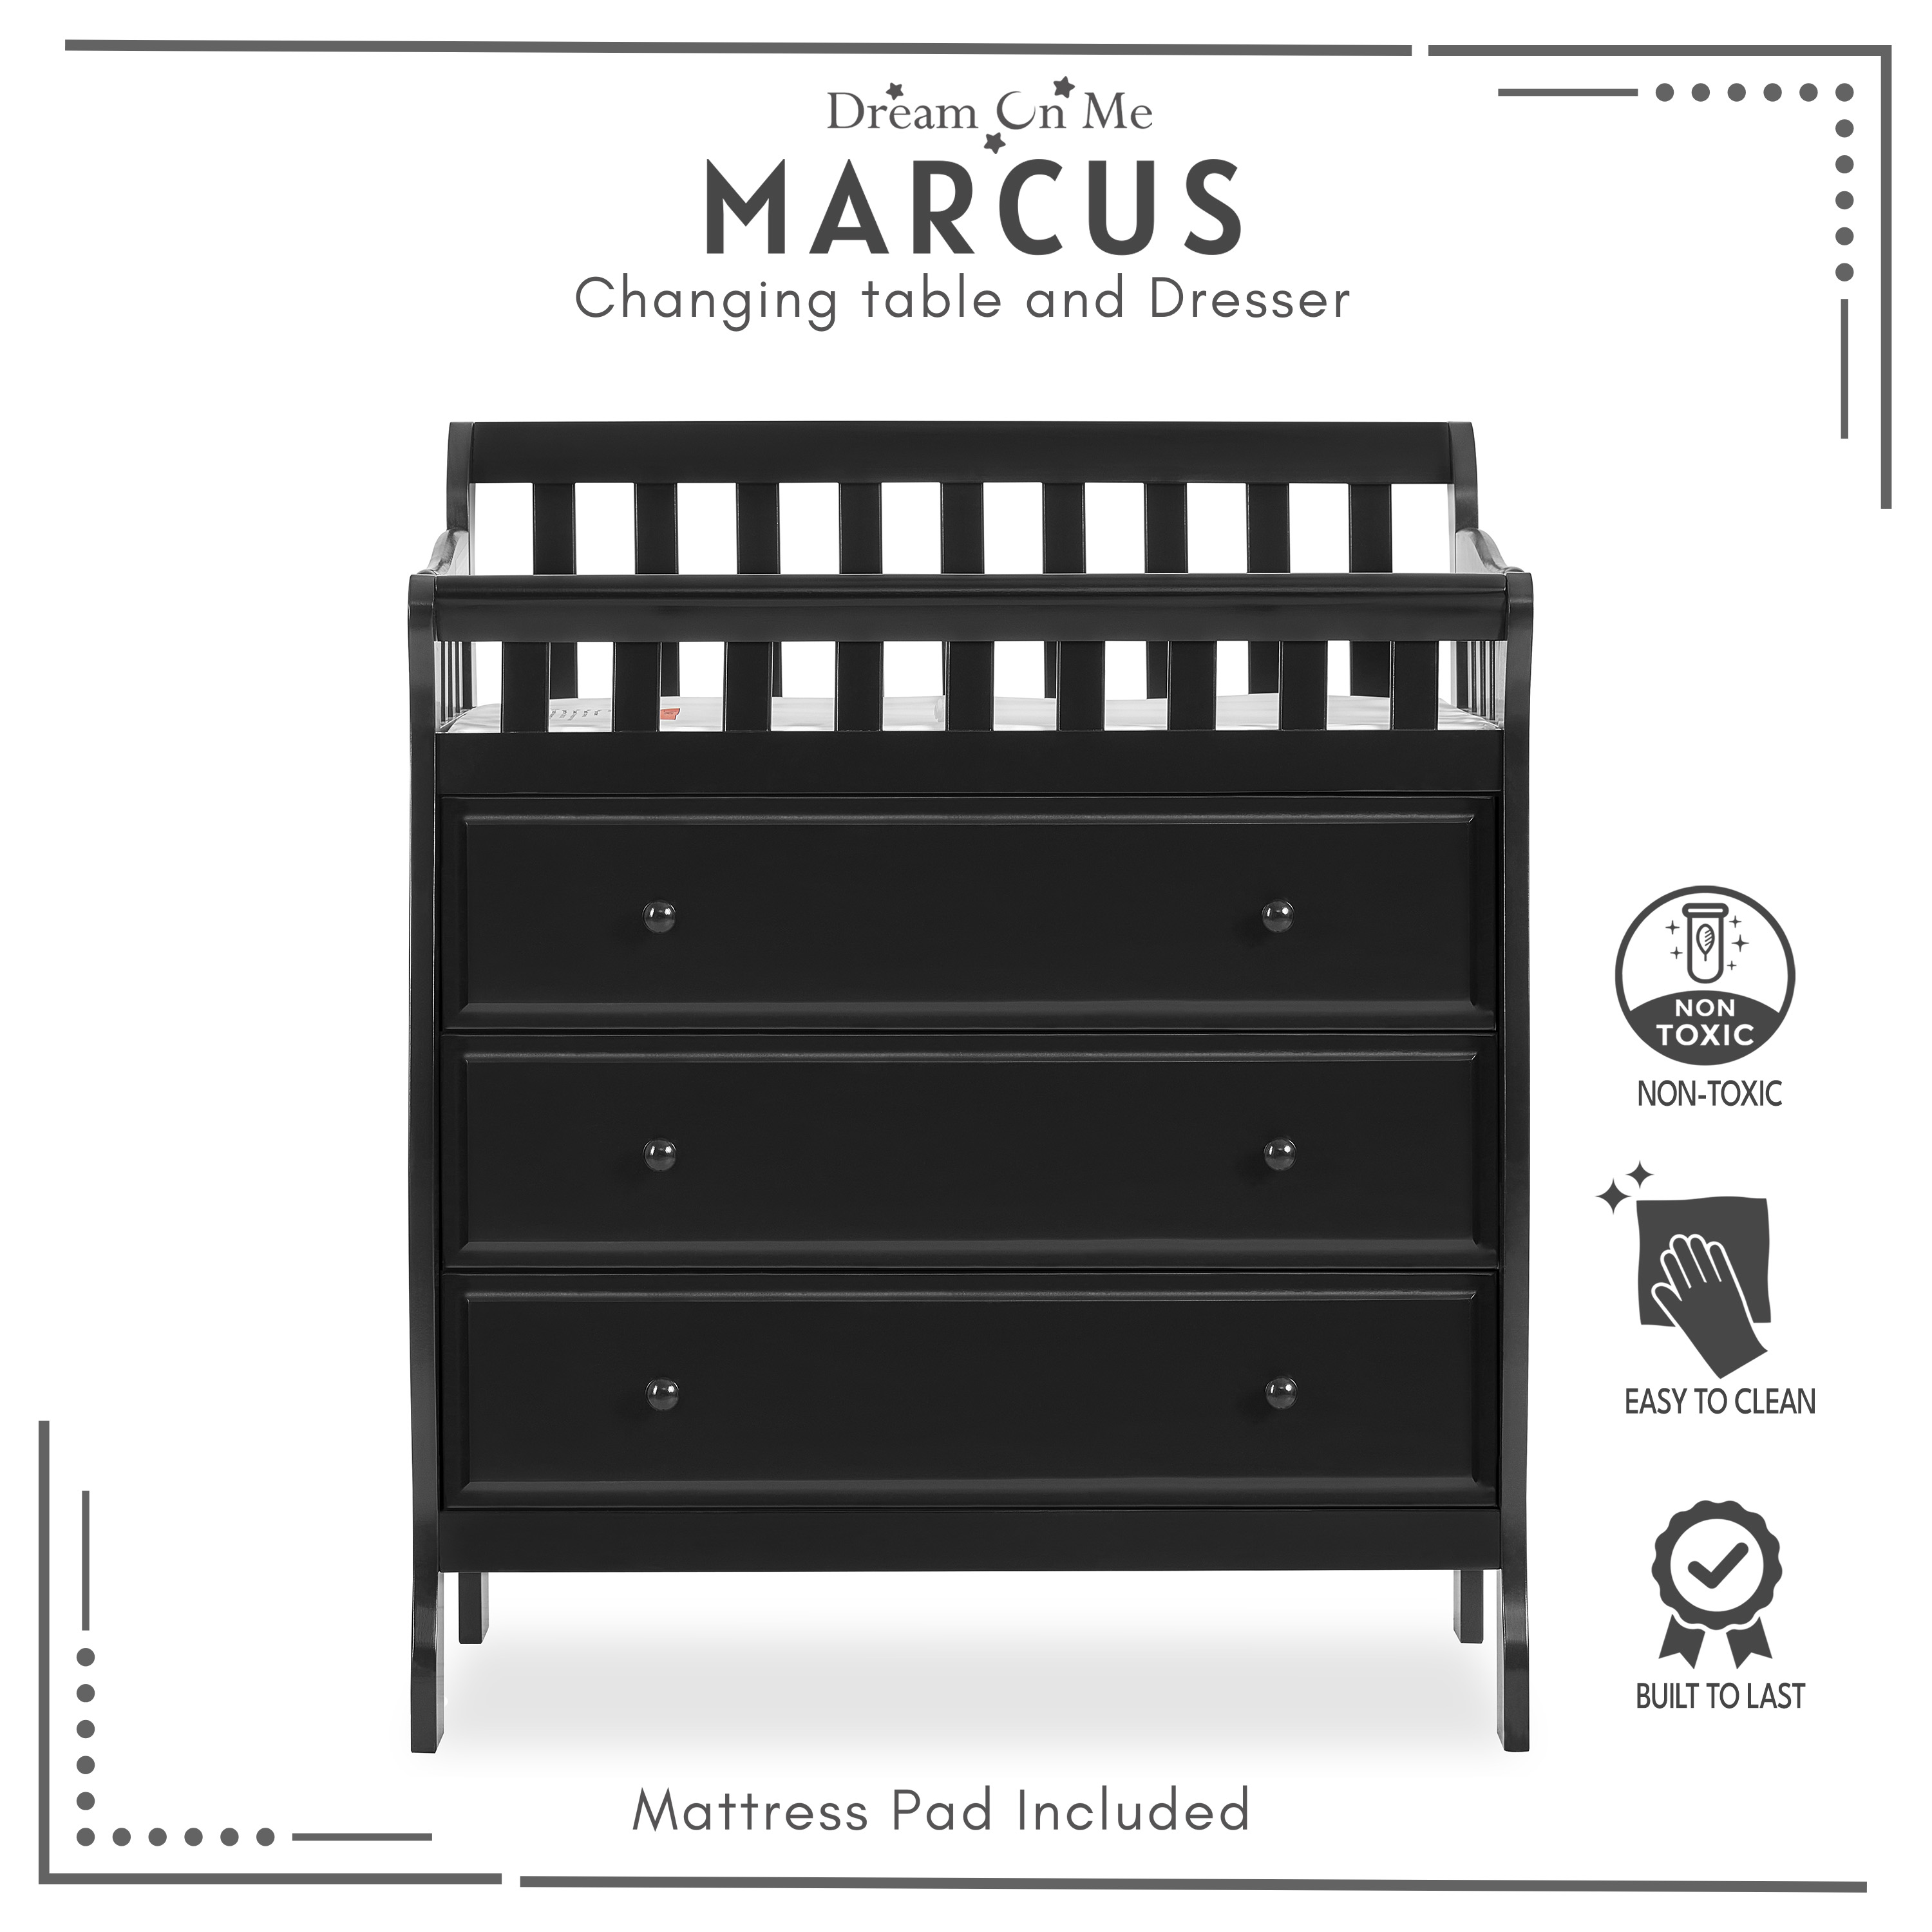 Dream On Me Marcus Changing Table And Dresser, Black - image 3 of 10